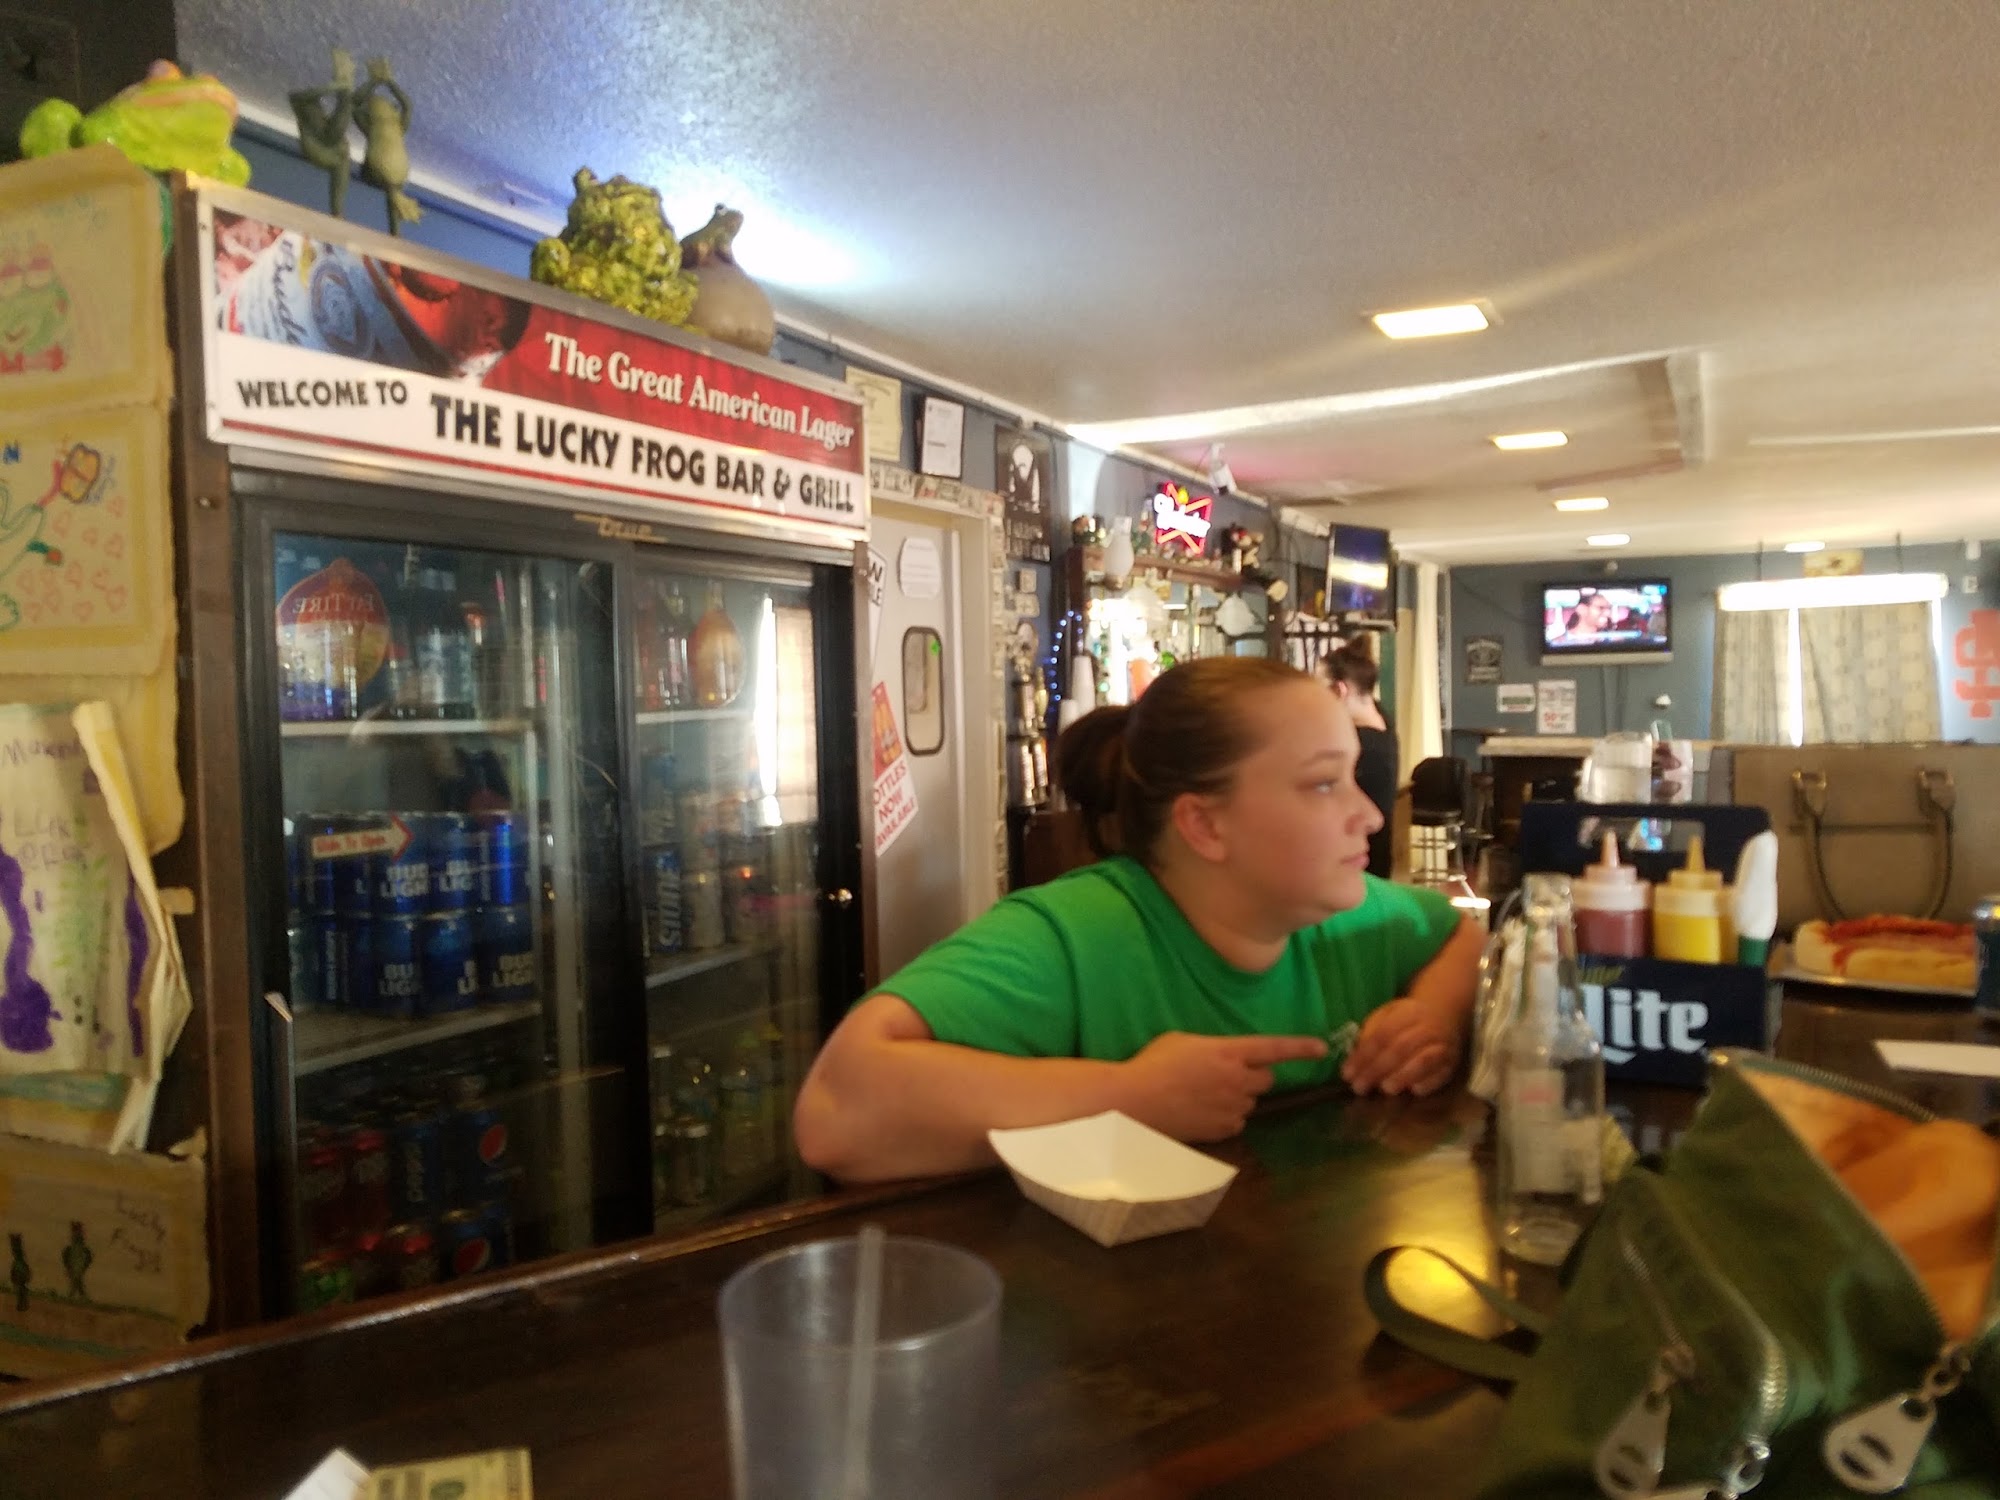 The Lucky Frog Bar and Grill